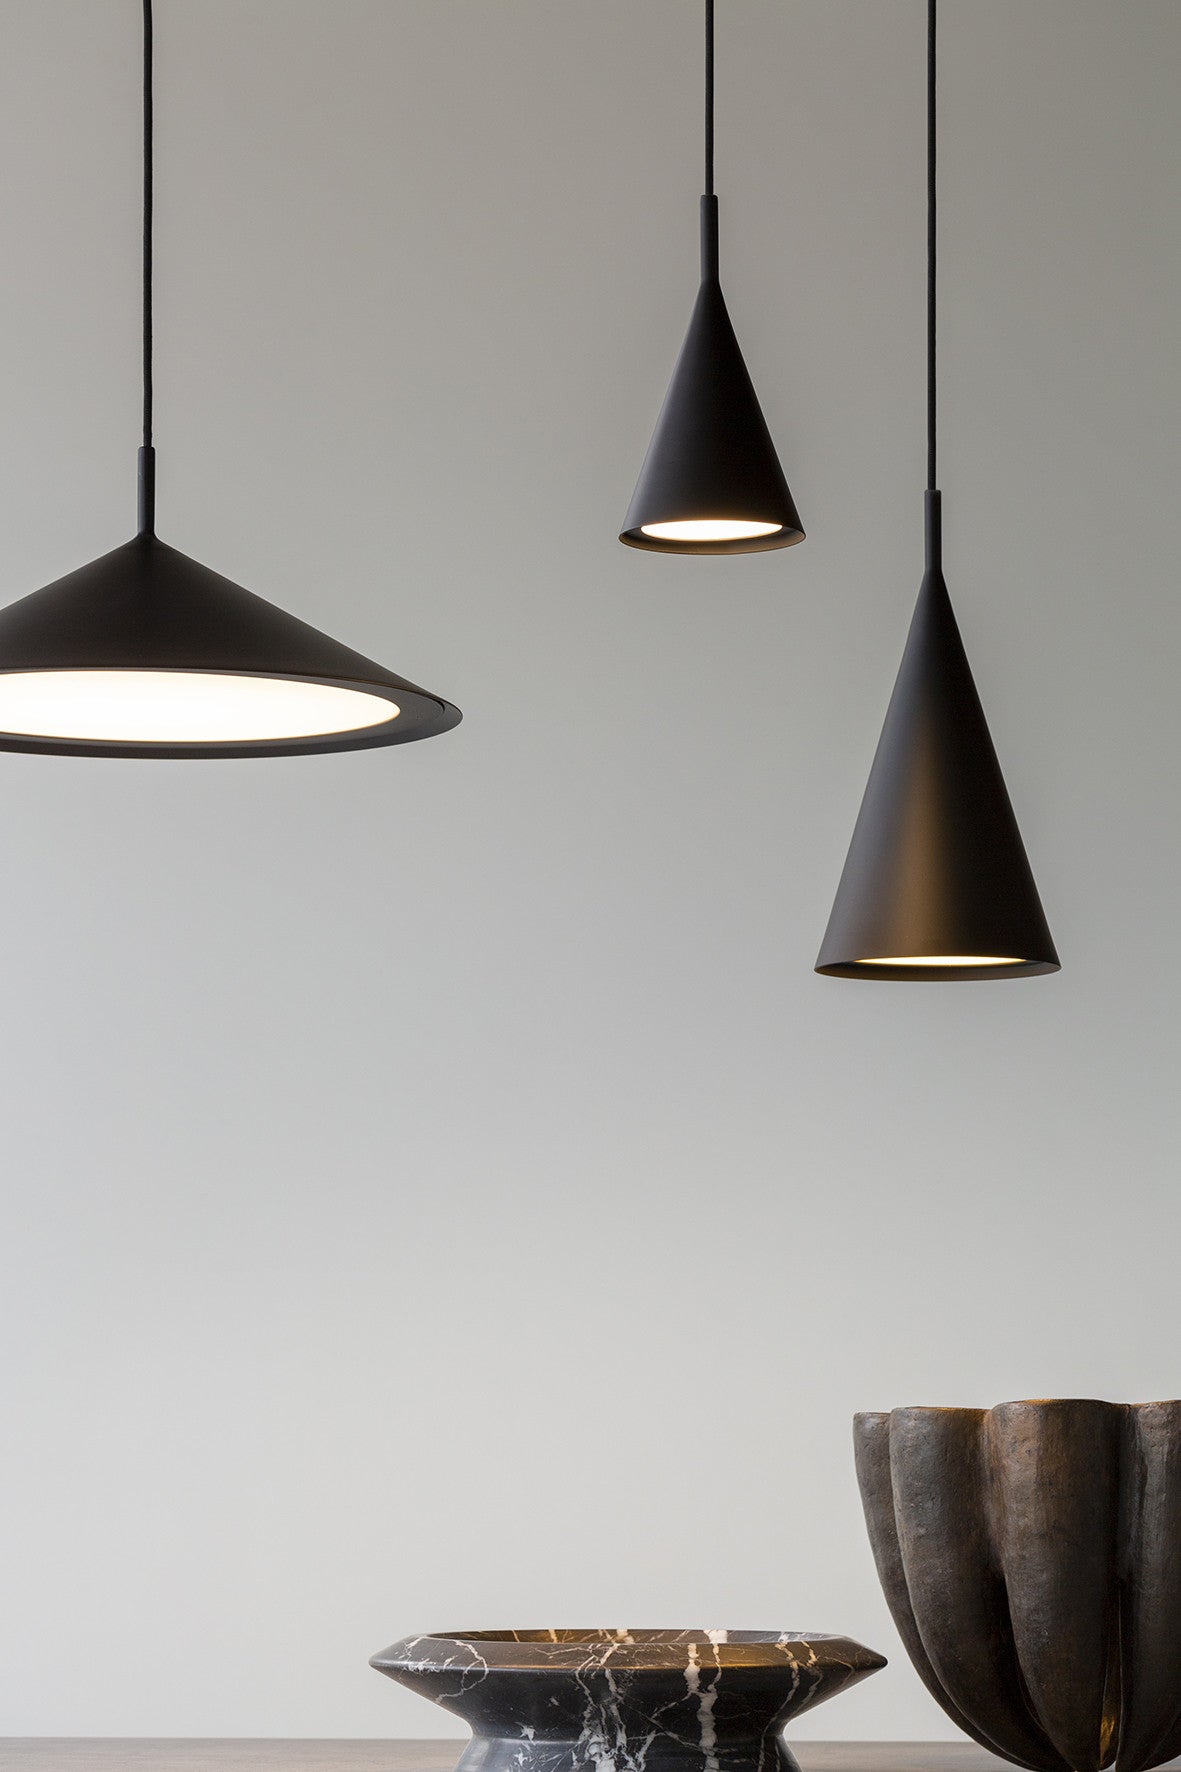 GORDON PENDANT 561.24 BY TOOY from $1190.00